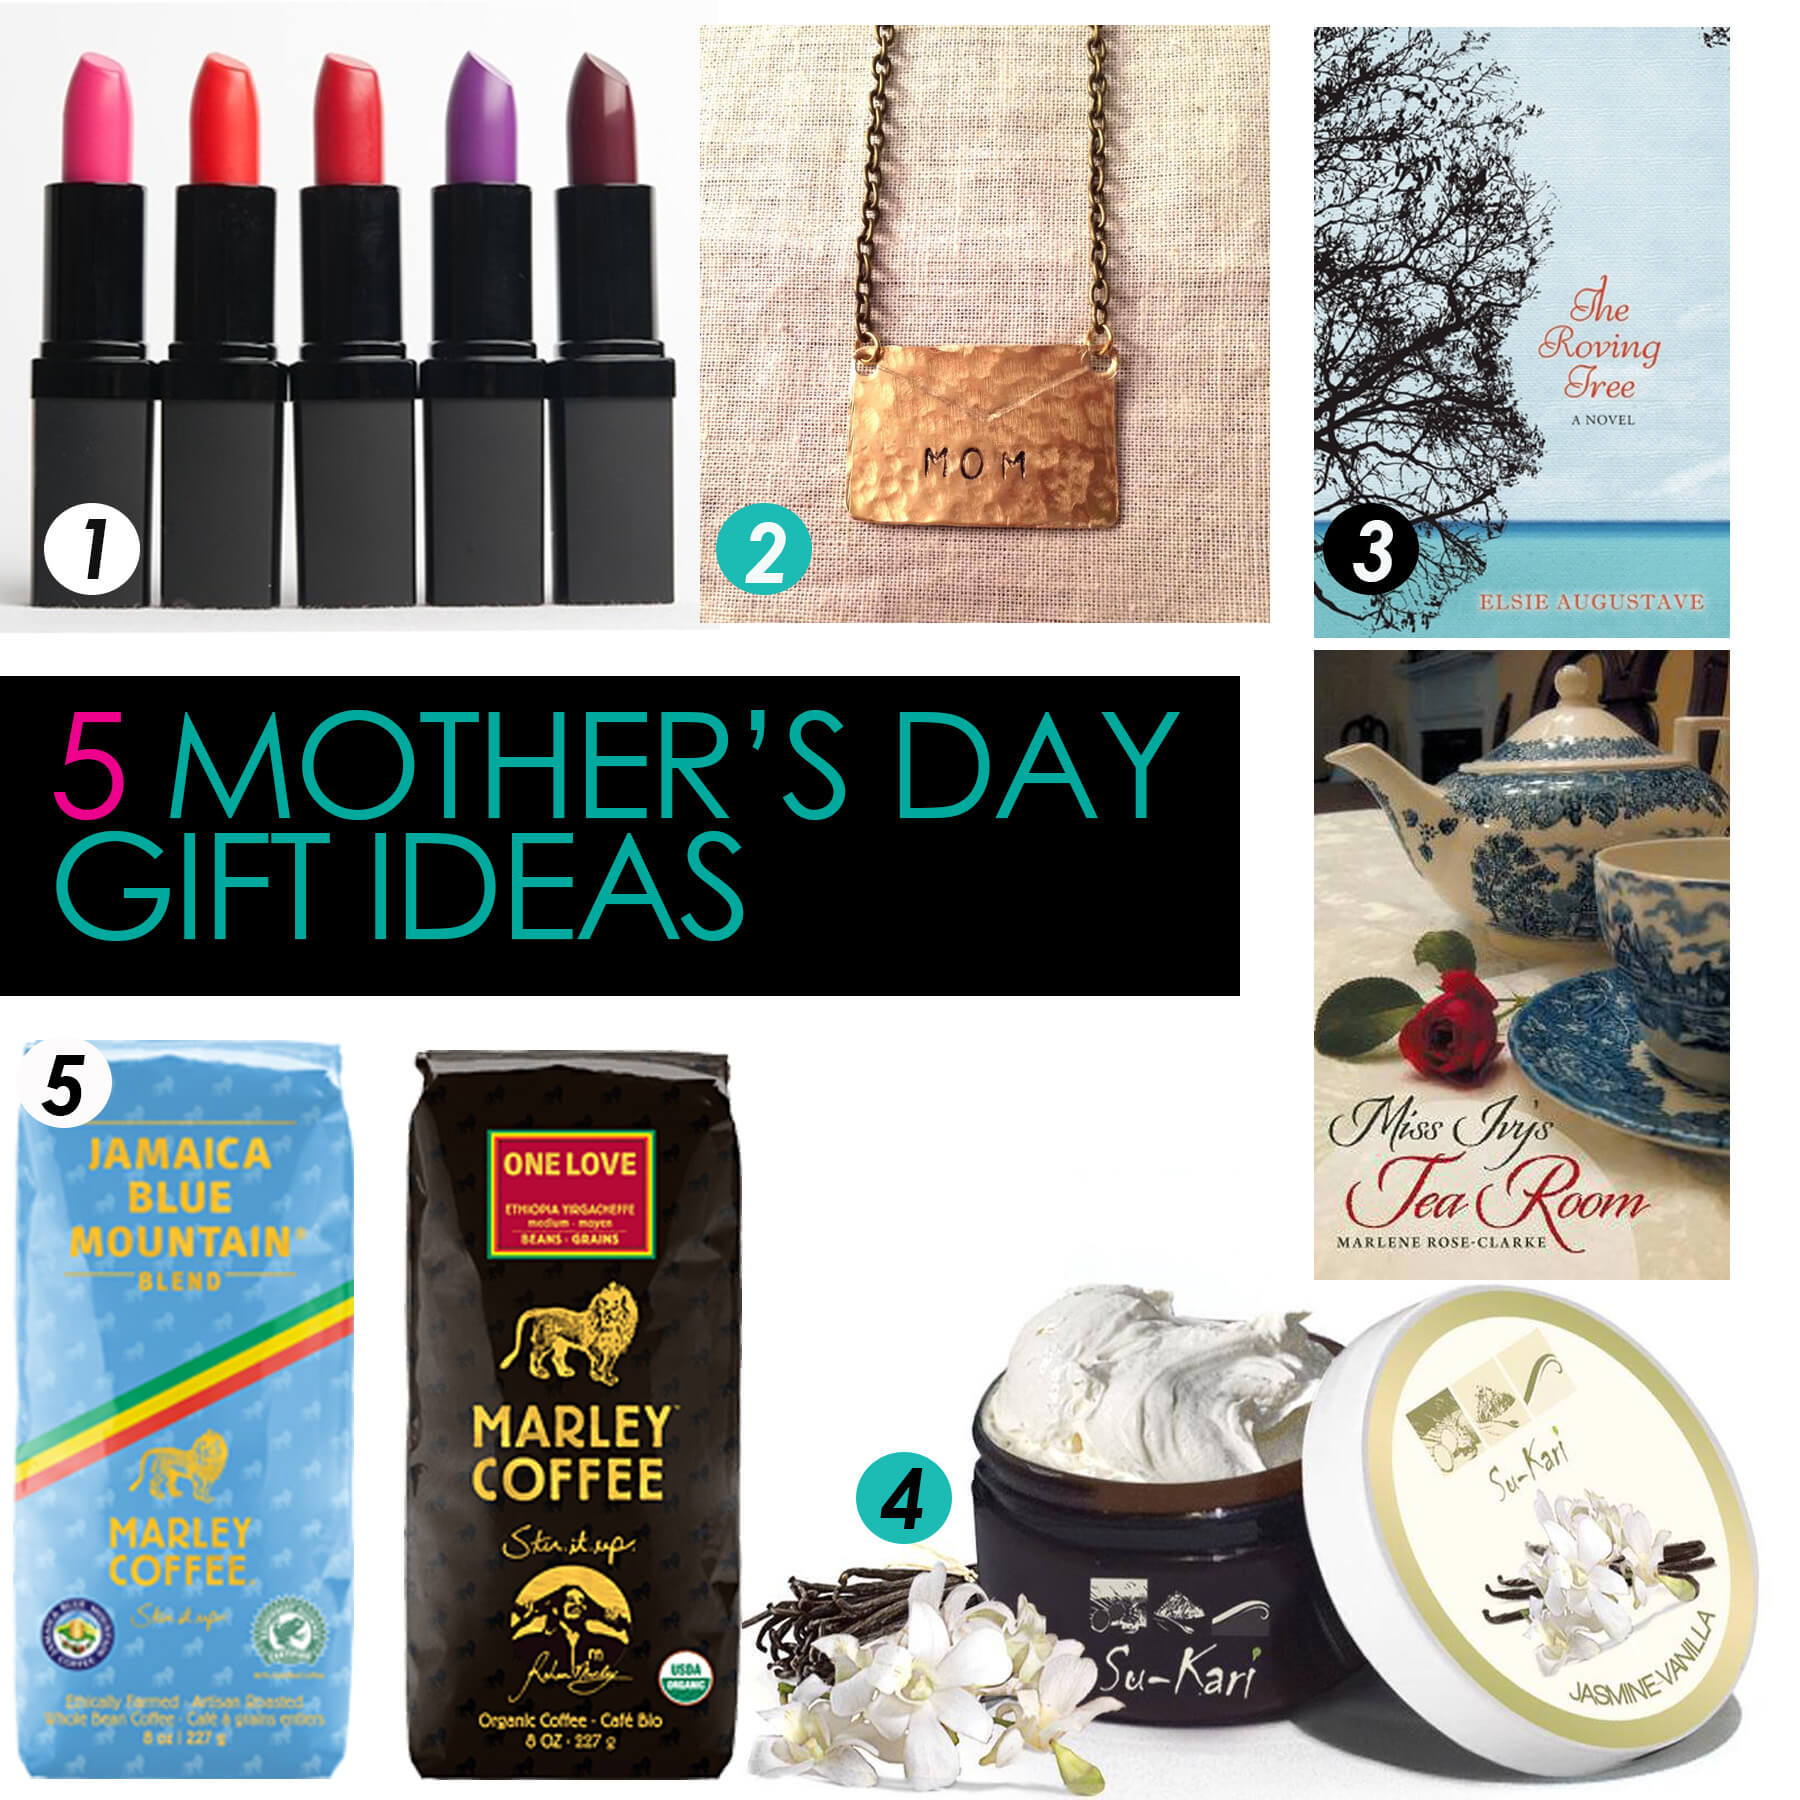 $50 gifts for mom